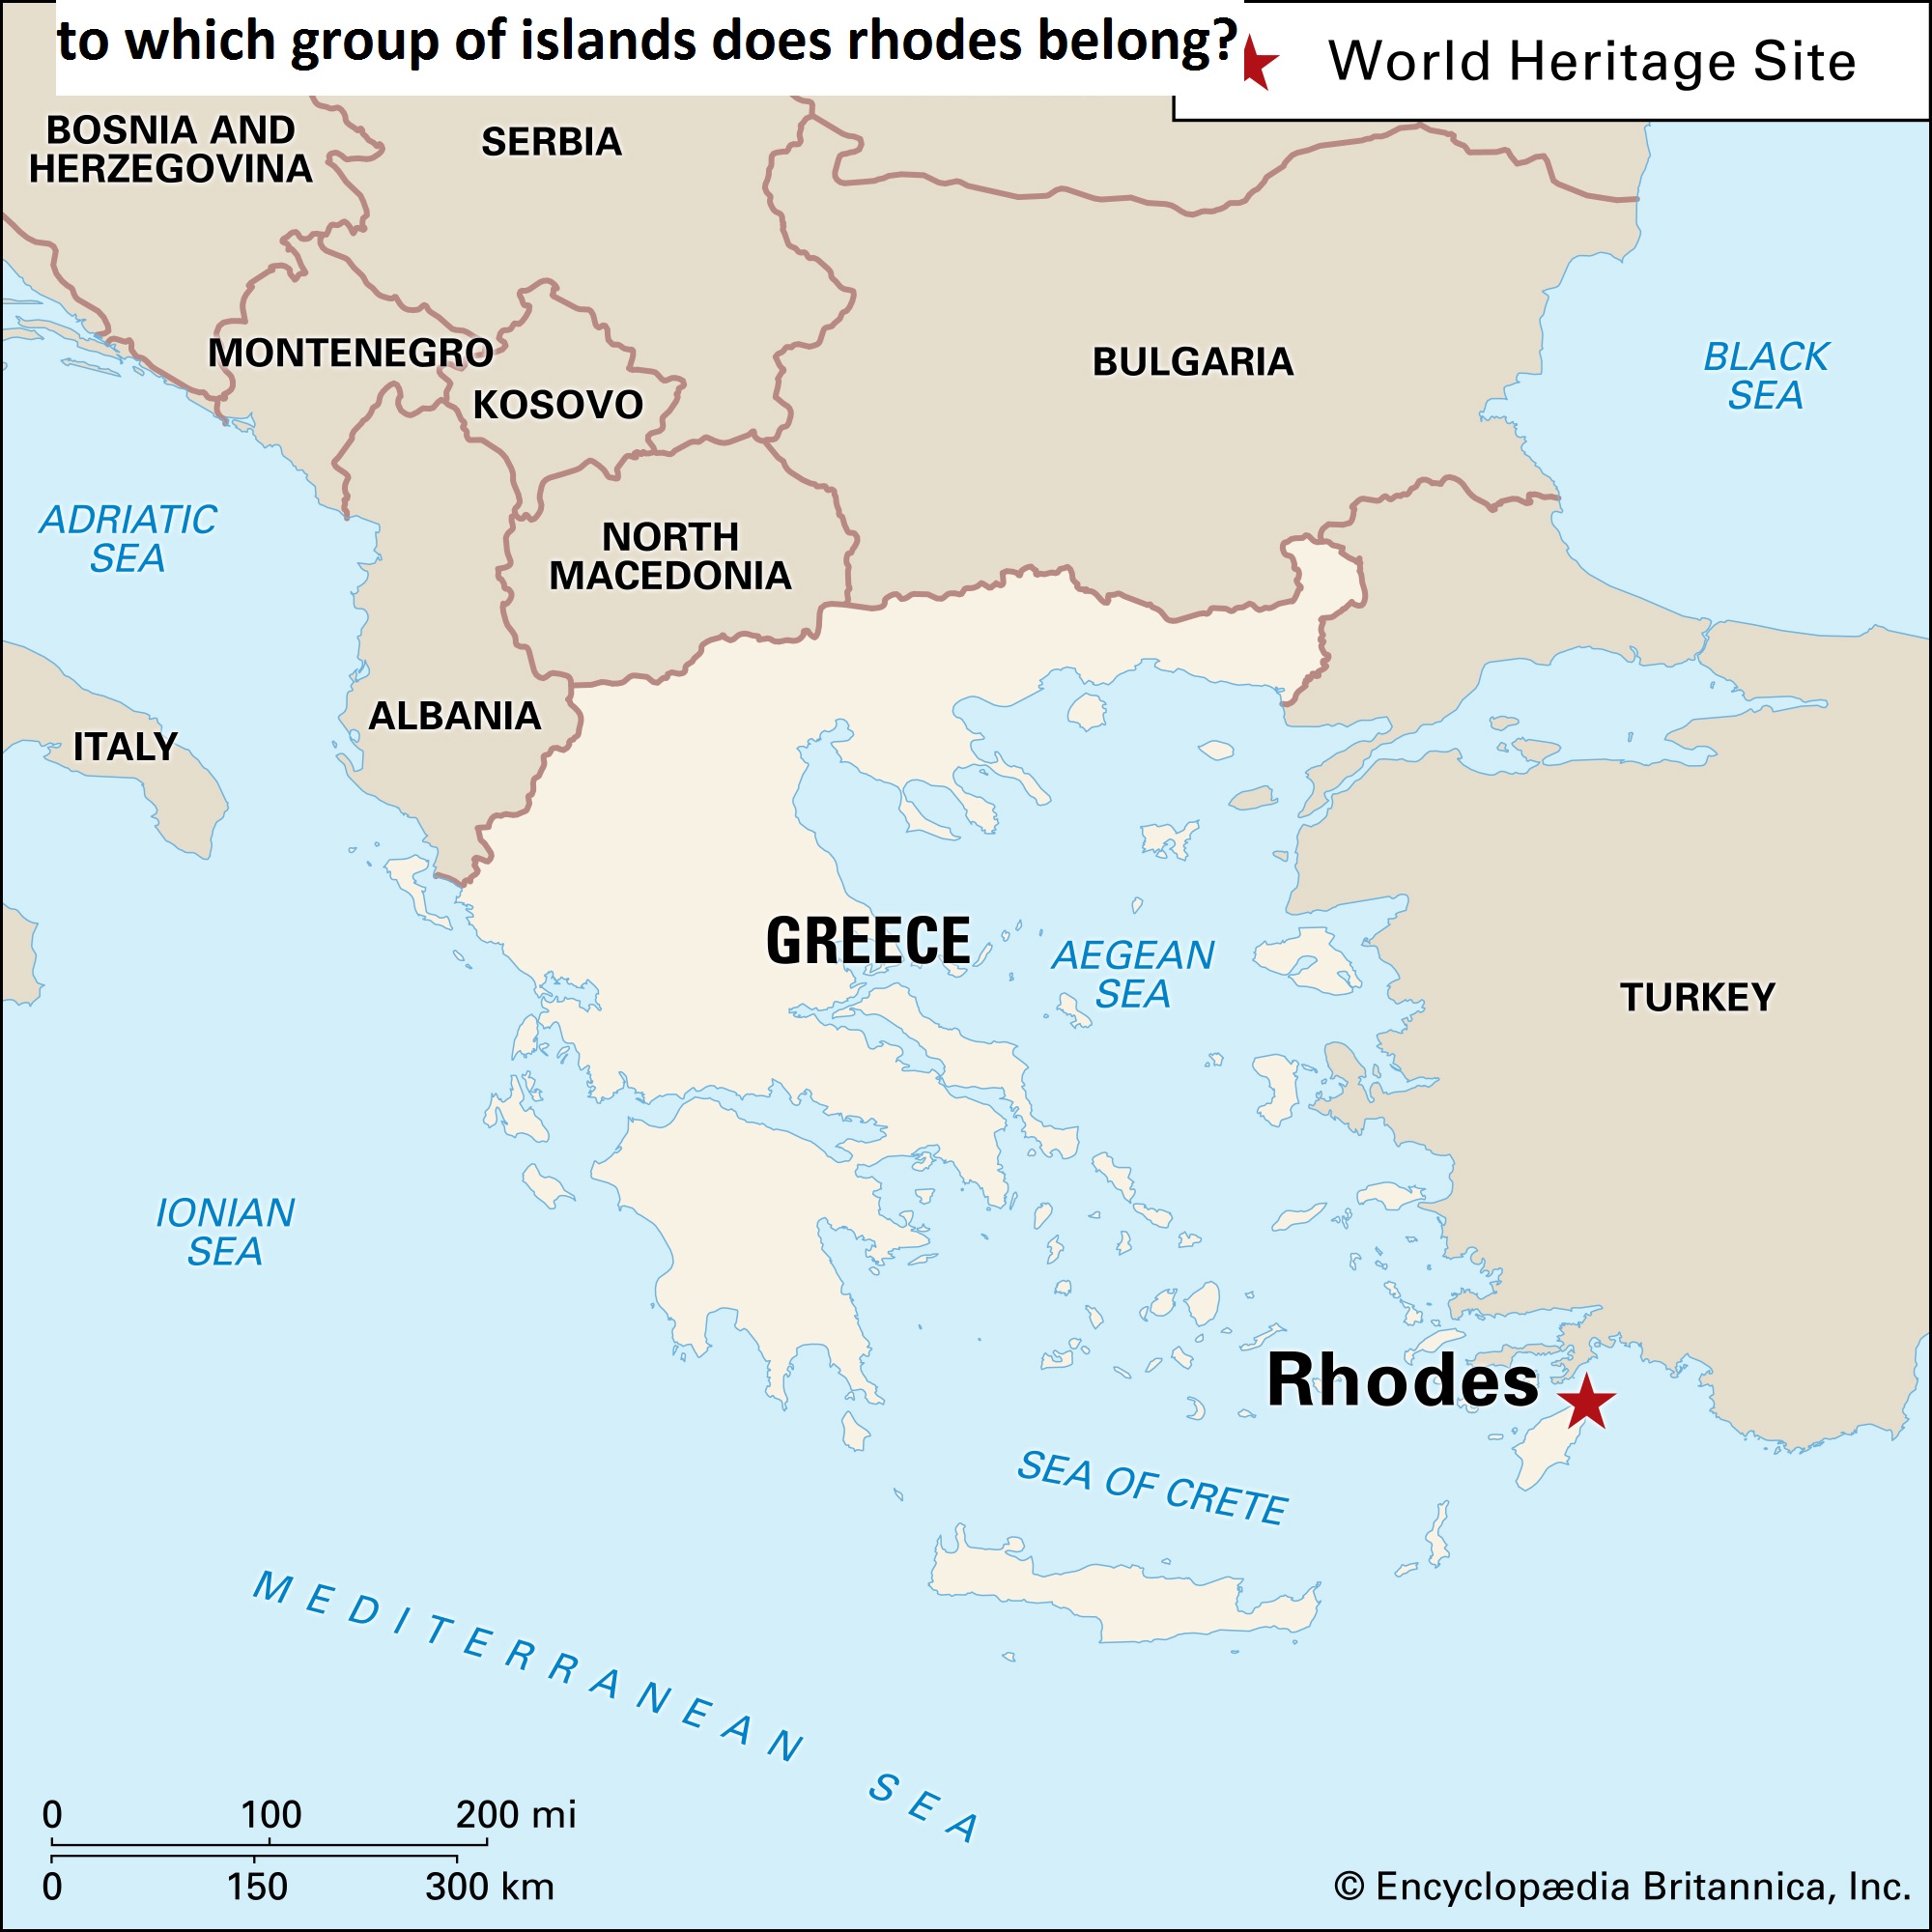 to which group of islands does rhodes belong?